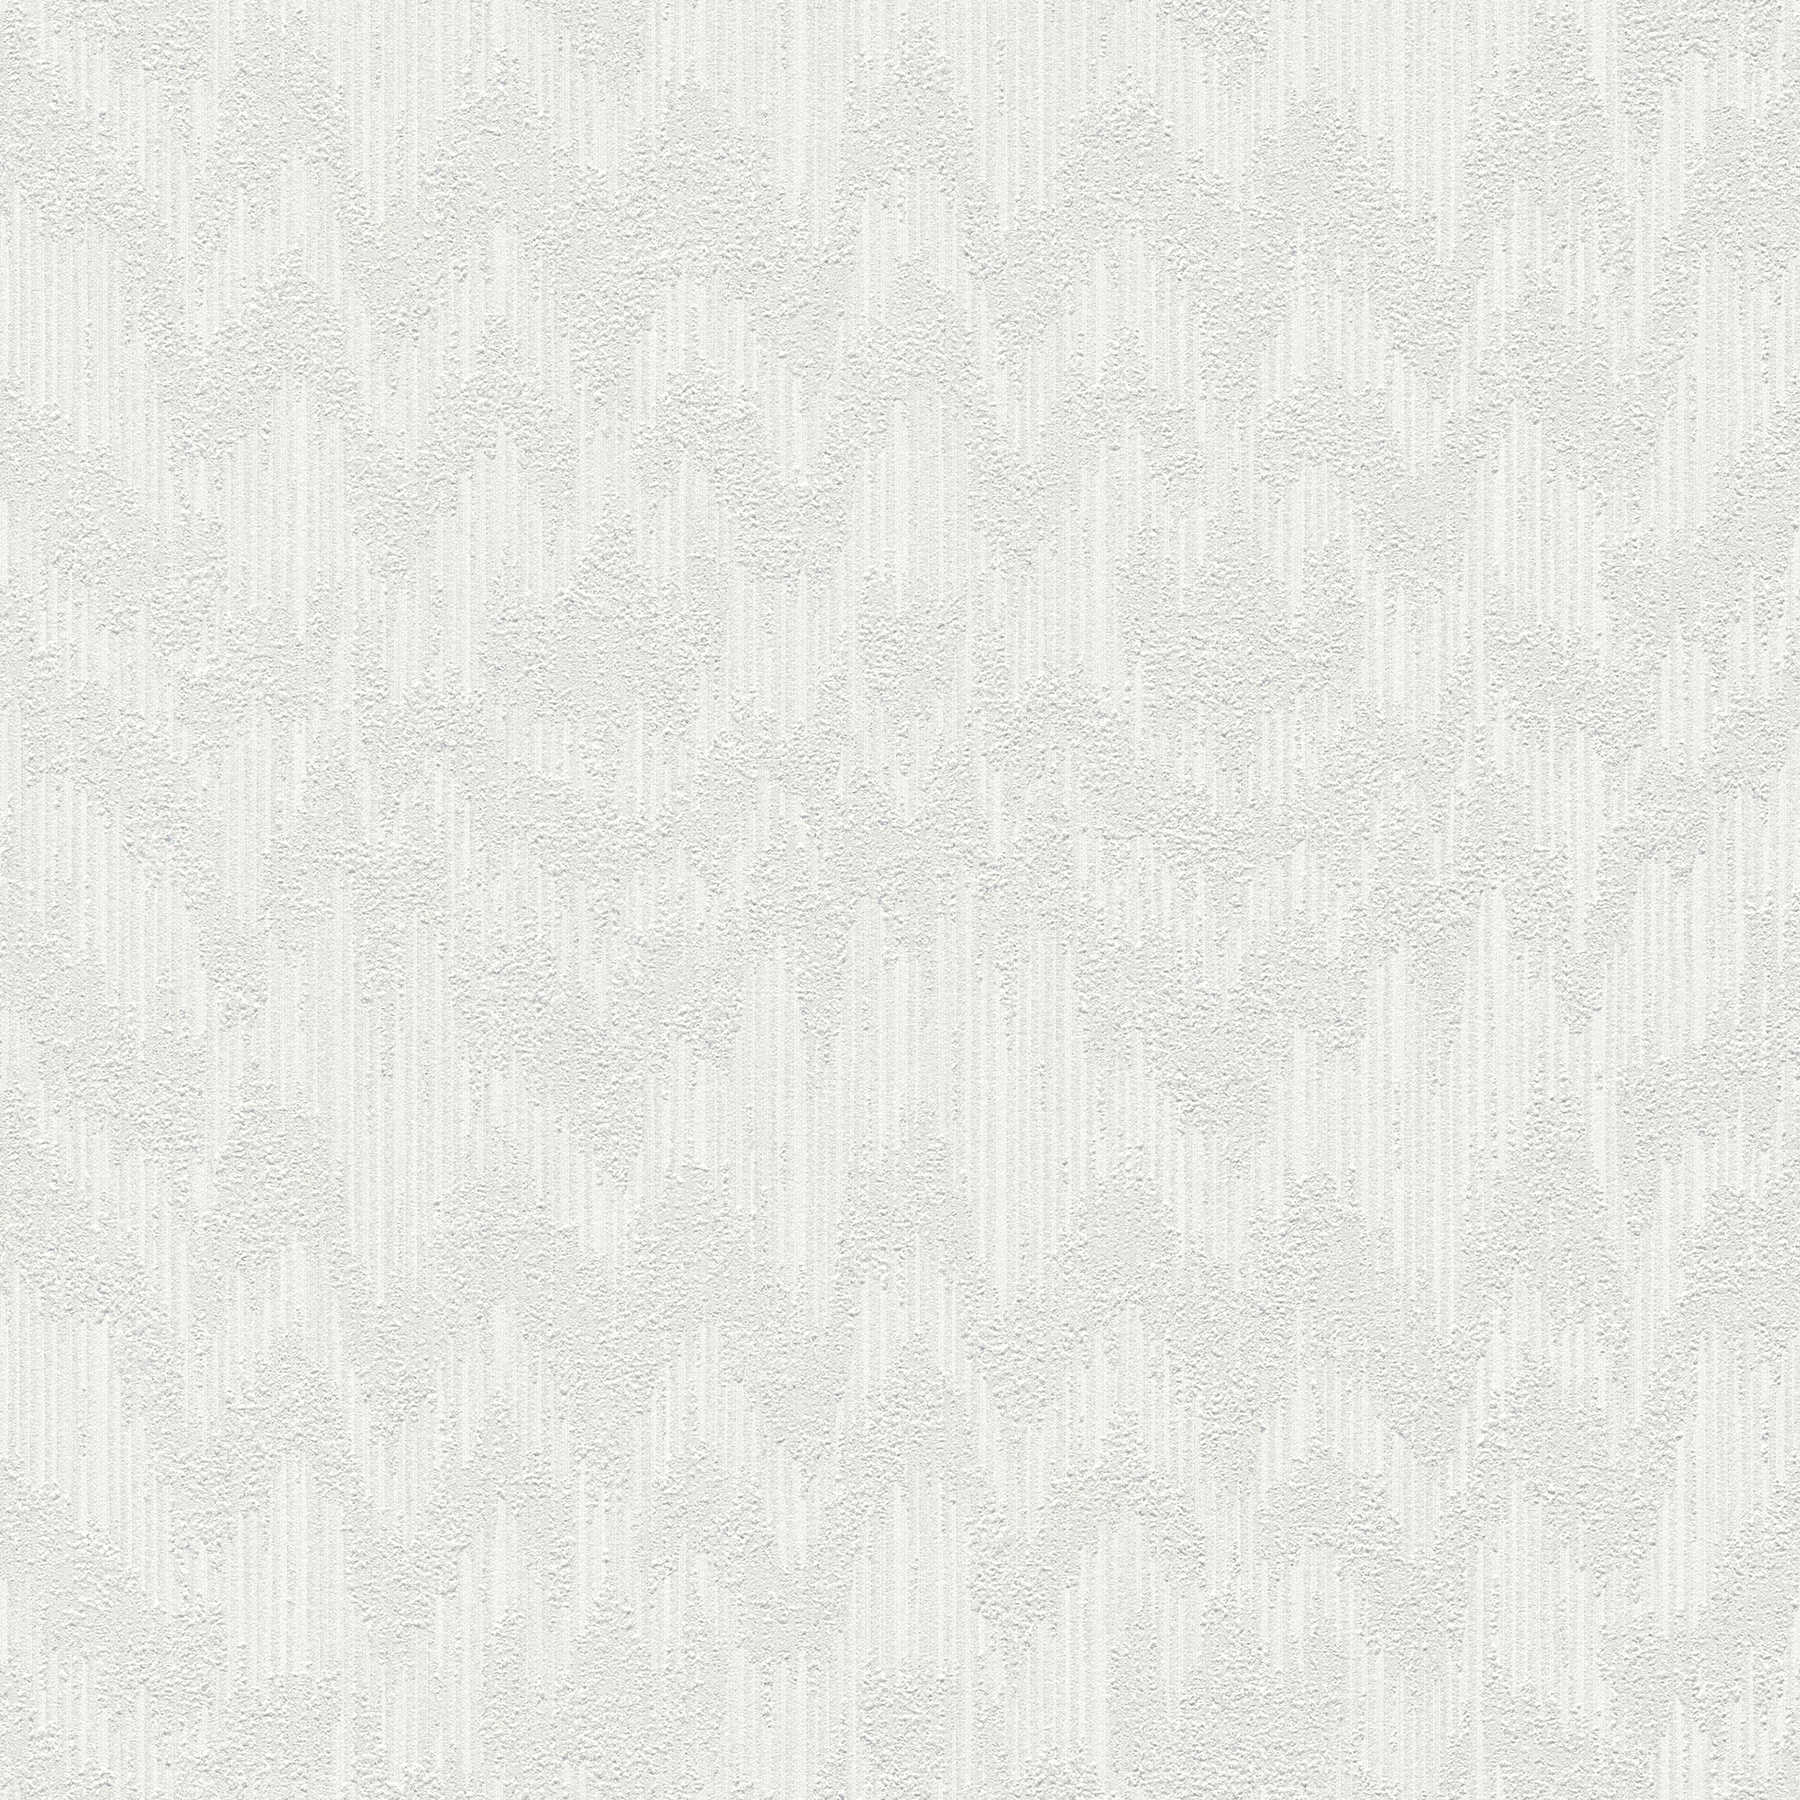 Wallpaper with textured pattern in ikat style - grey, metallic
